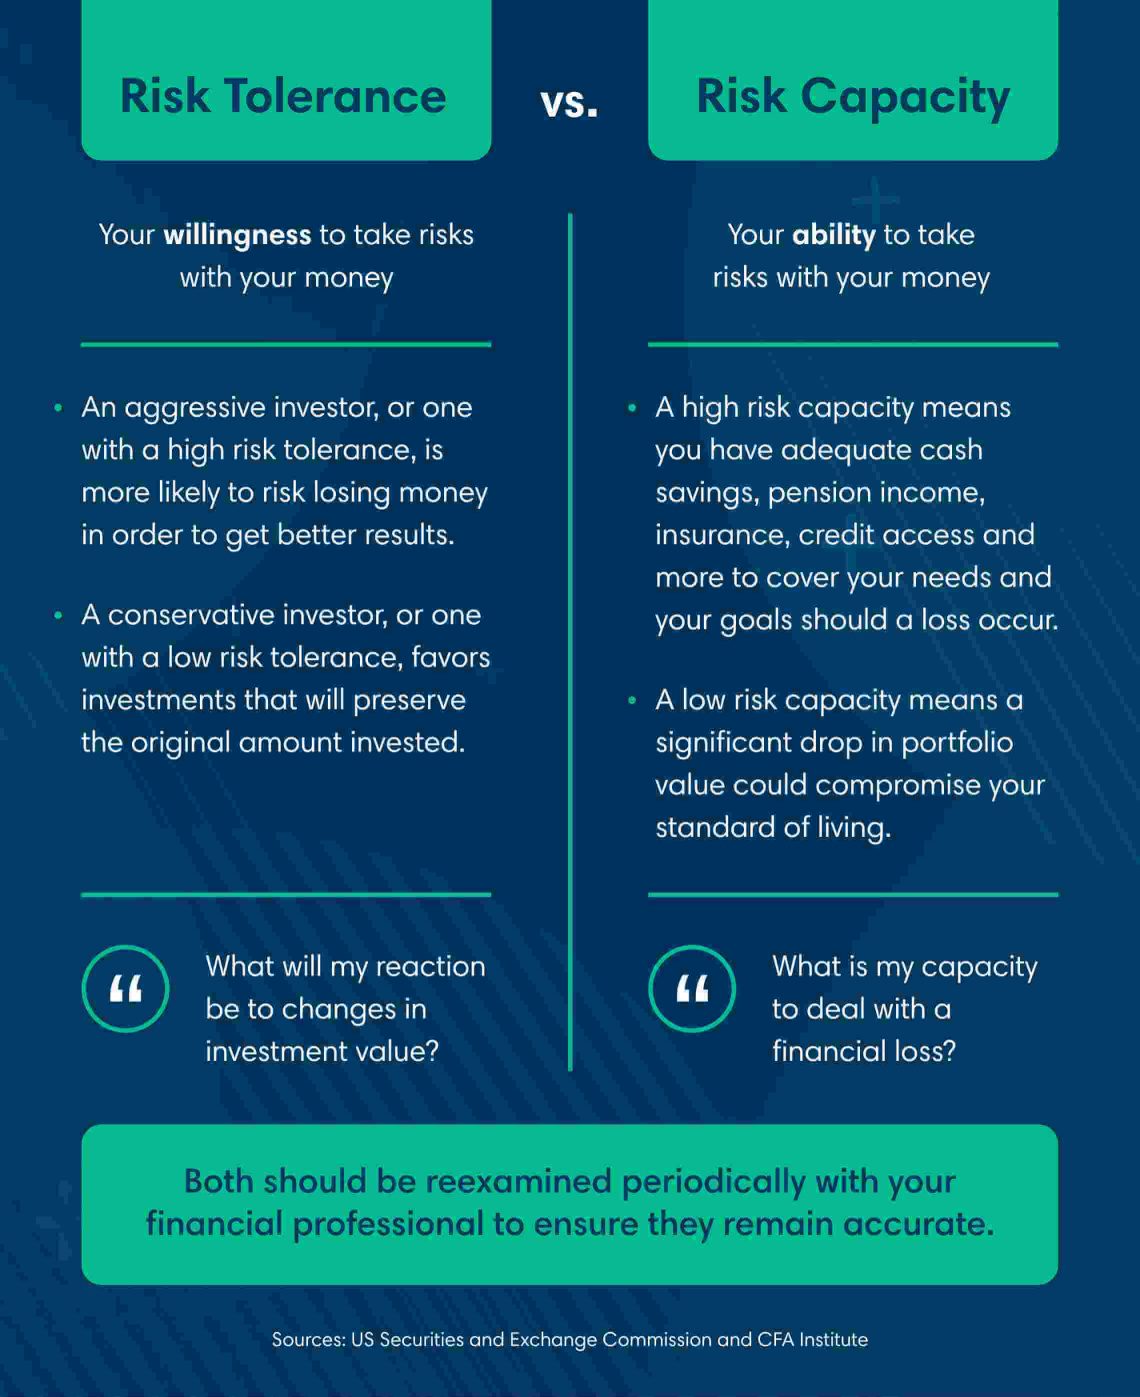 Infographic showing the differences between risk tolerance and risk capacity